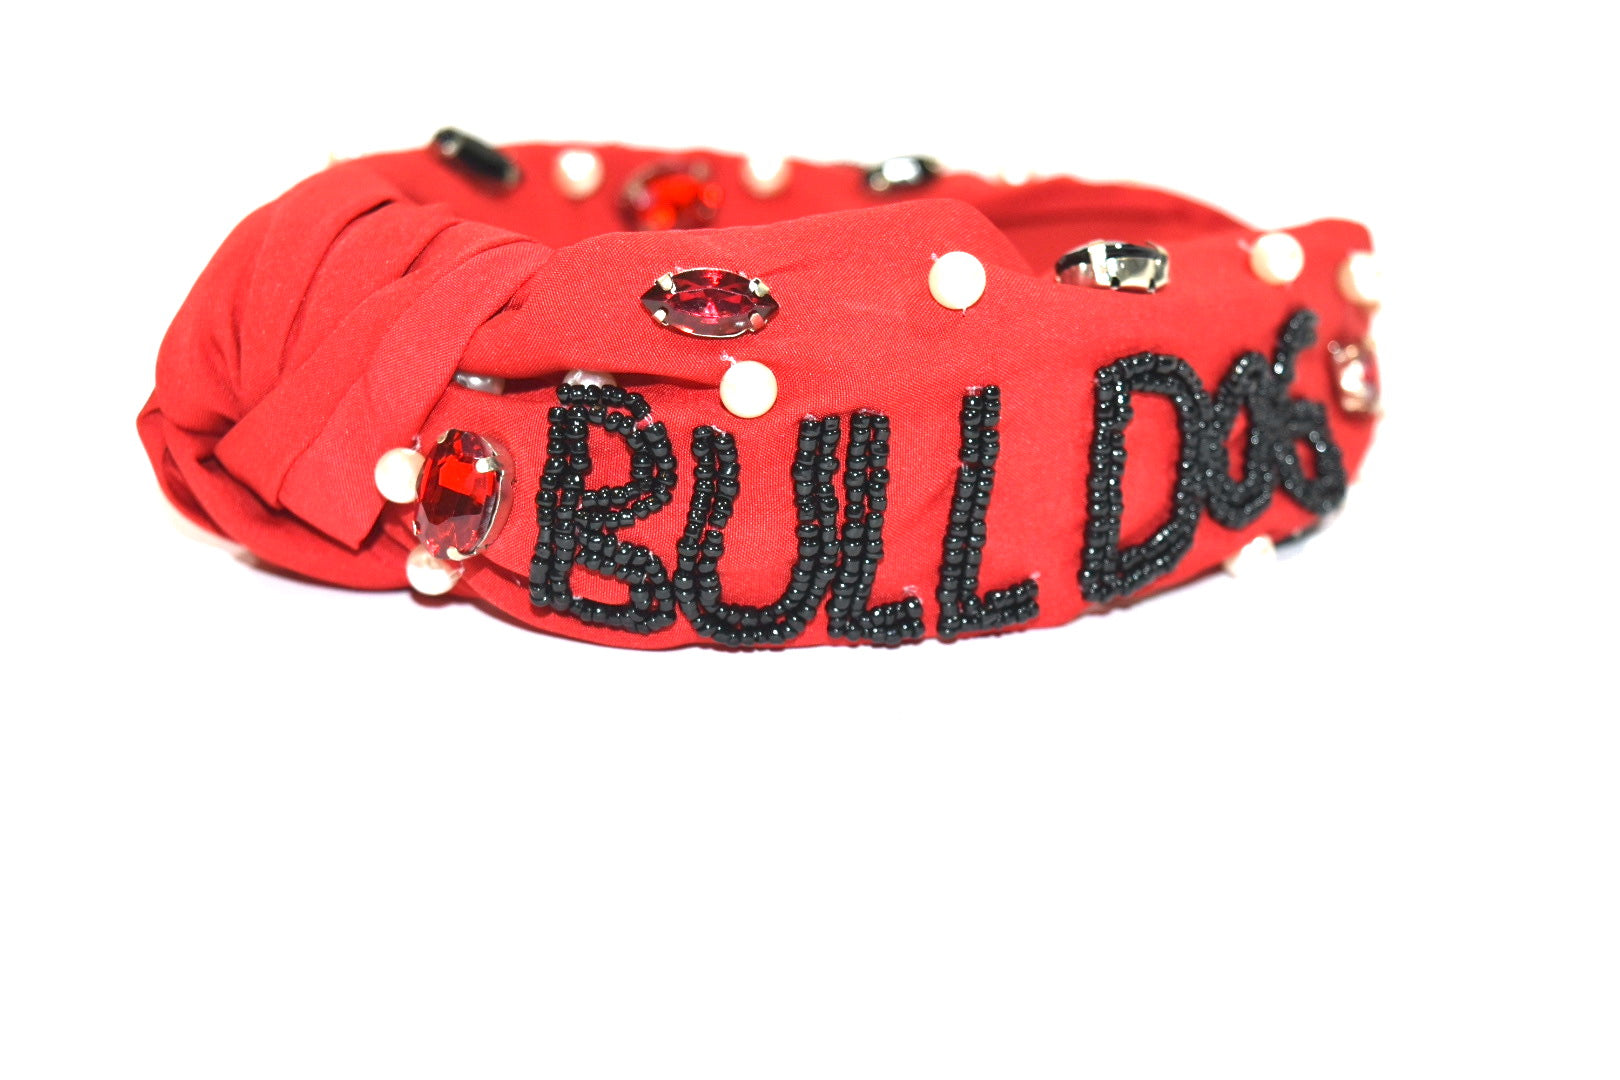 Red headband with black beaded "bulldog" lettering, crystals, and pearls.